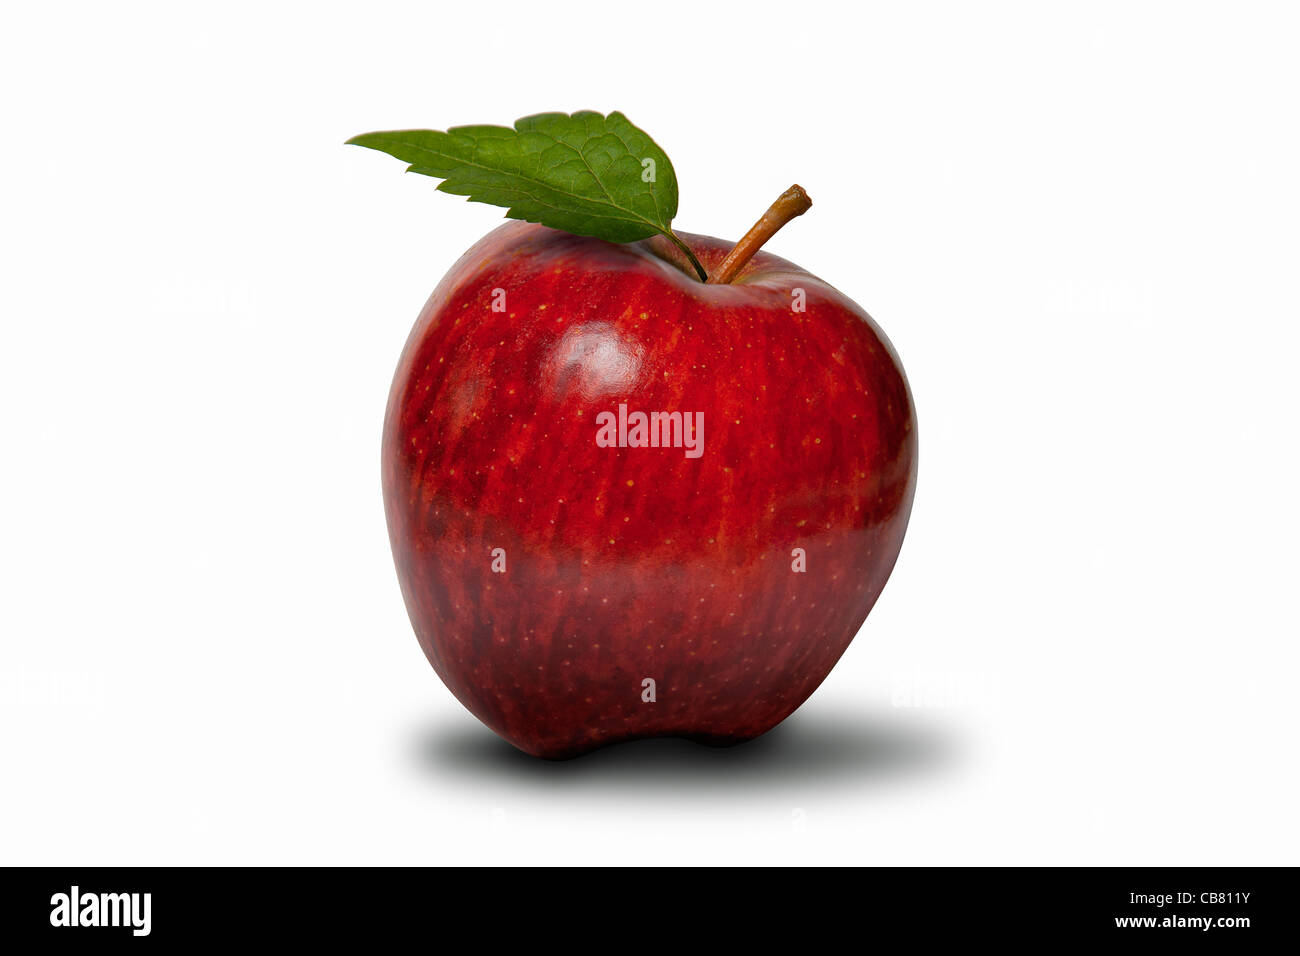 Pomme Rouge avec feuille verte isolated on white with clipping path Banque D'Images